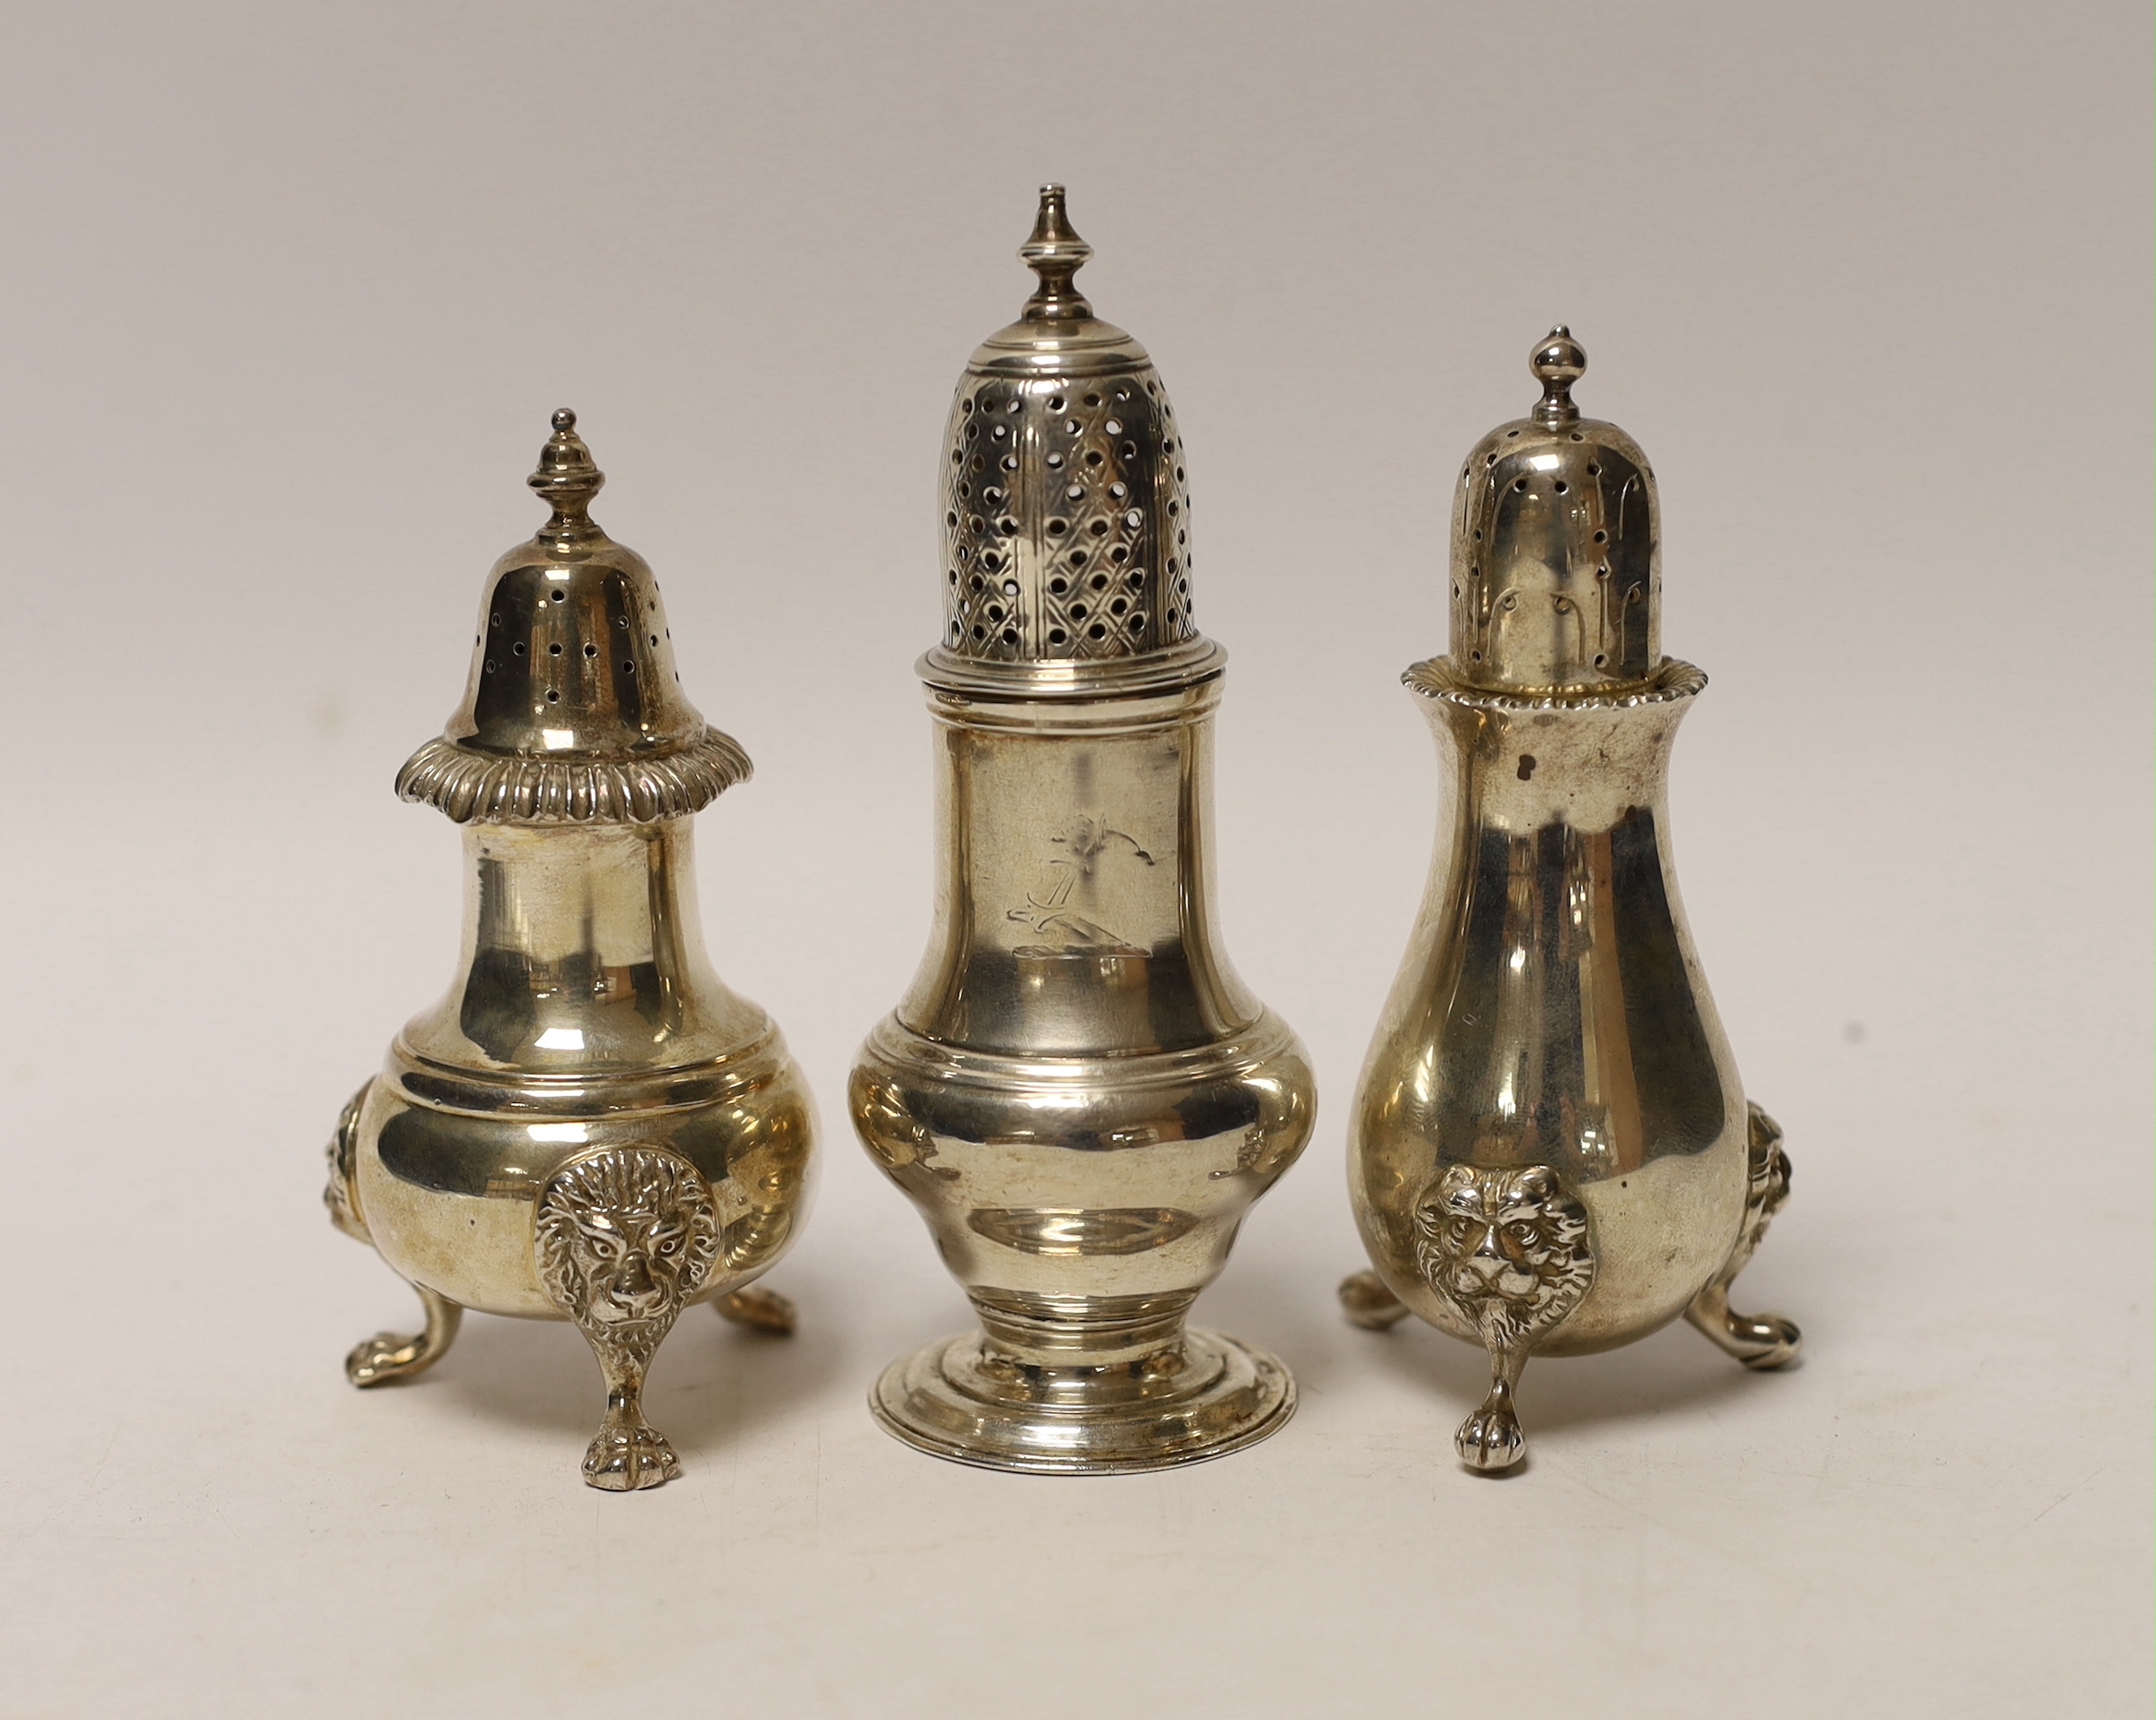 A George III silver baluster pepperette, London, 1763, 12.7cm, together with two modern silver pepperettes.